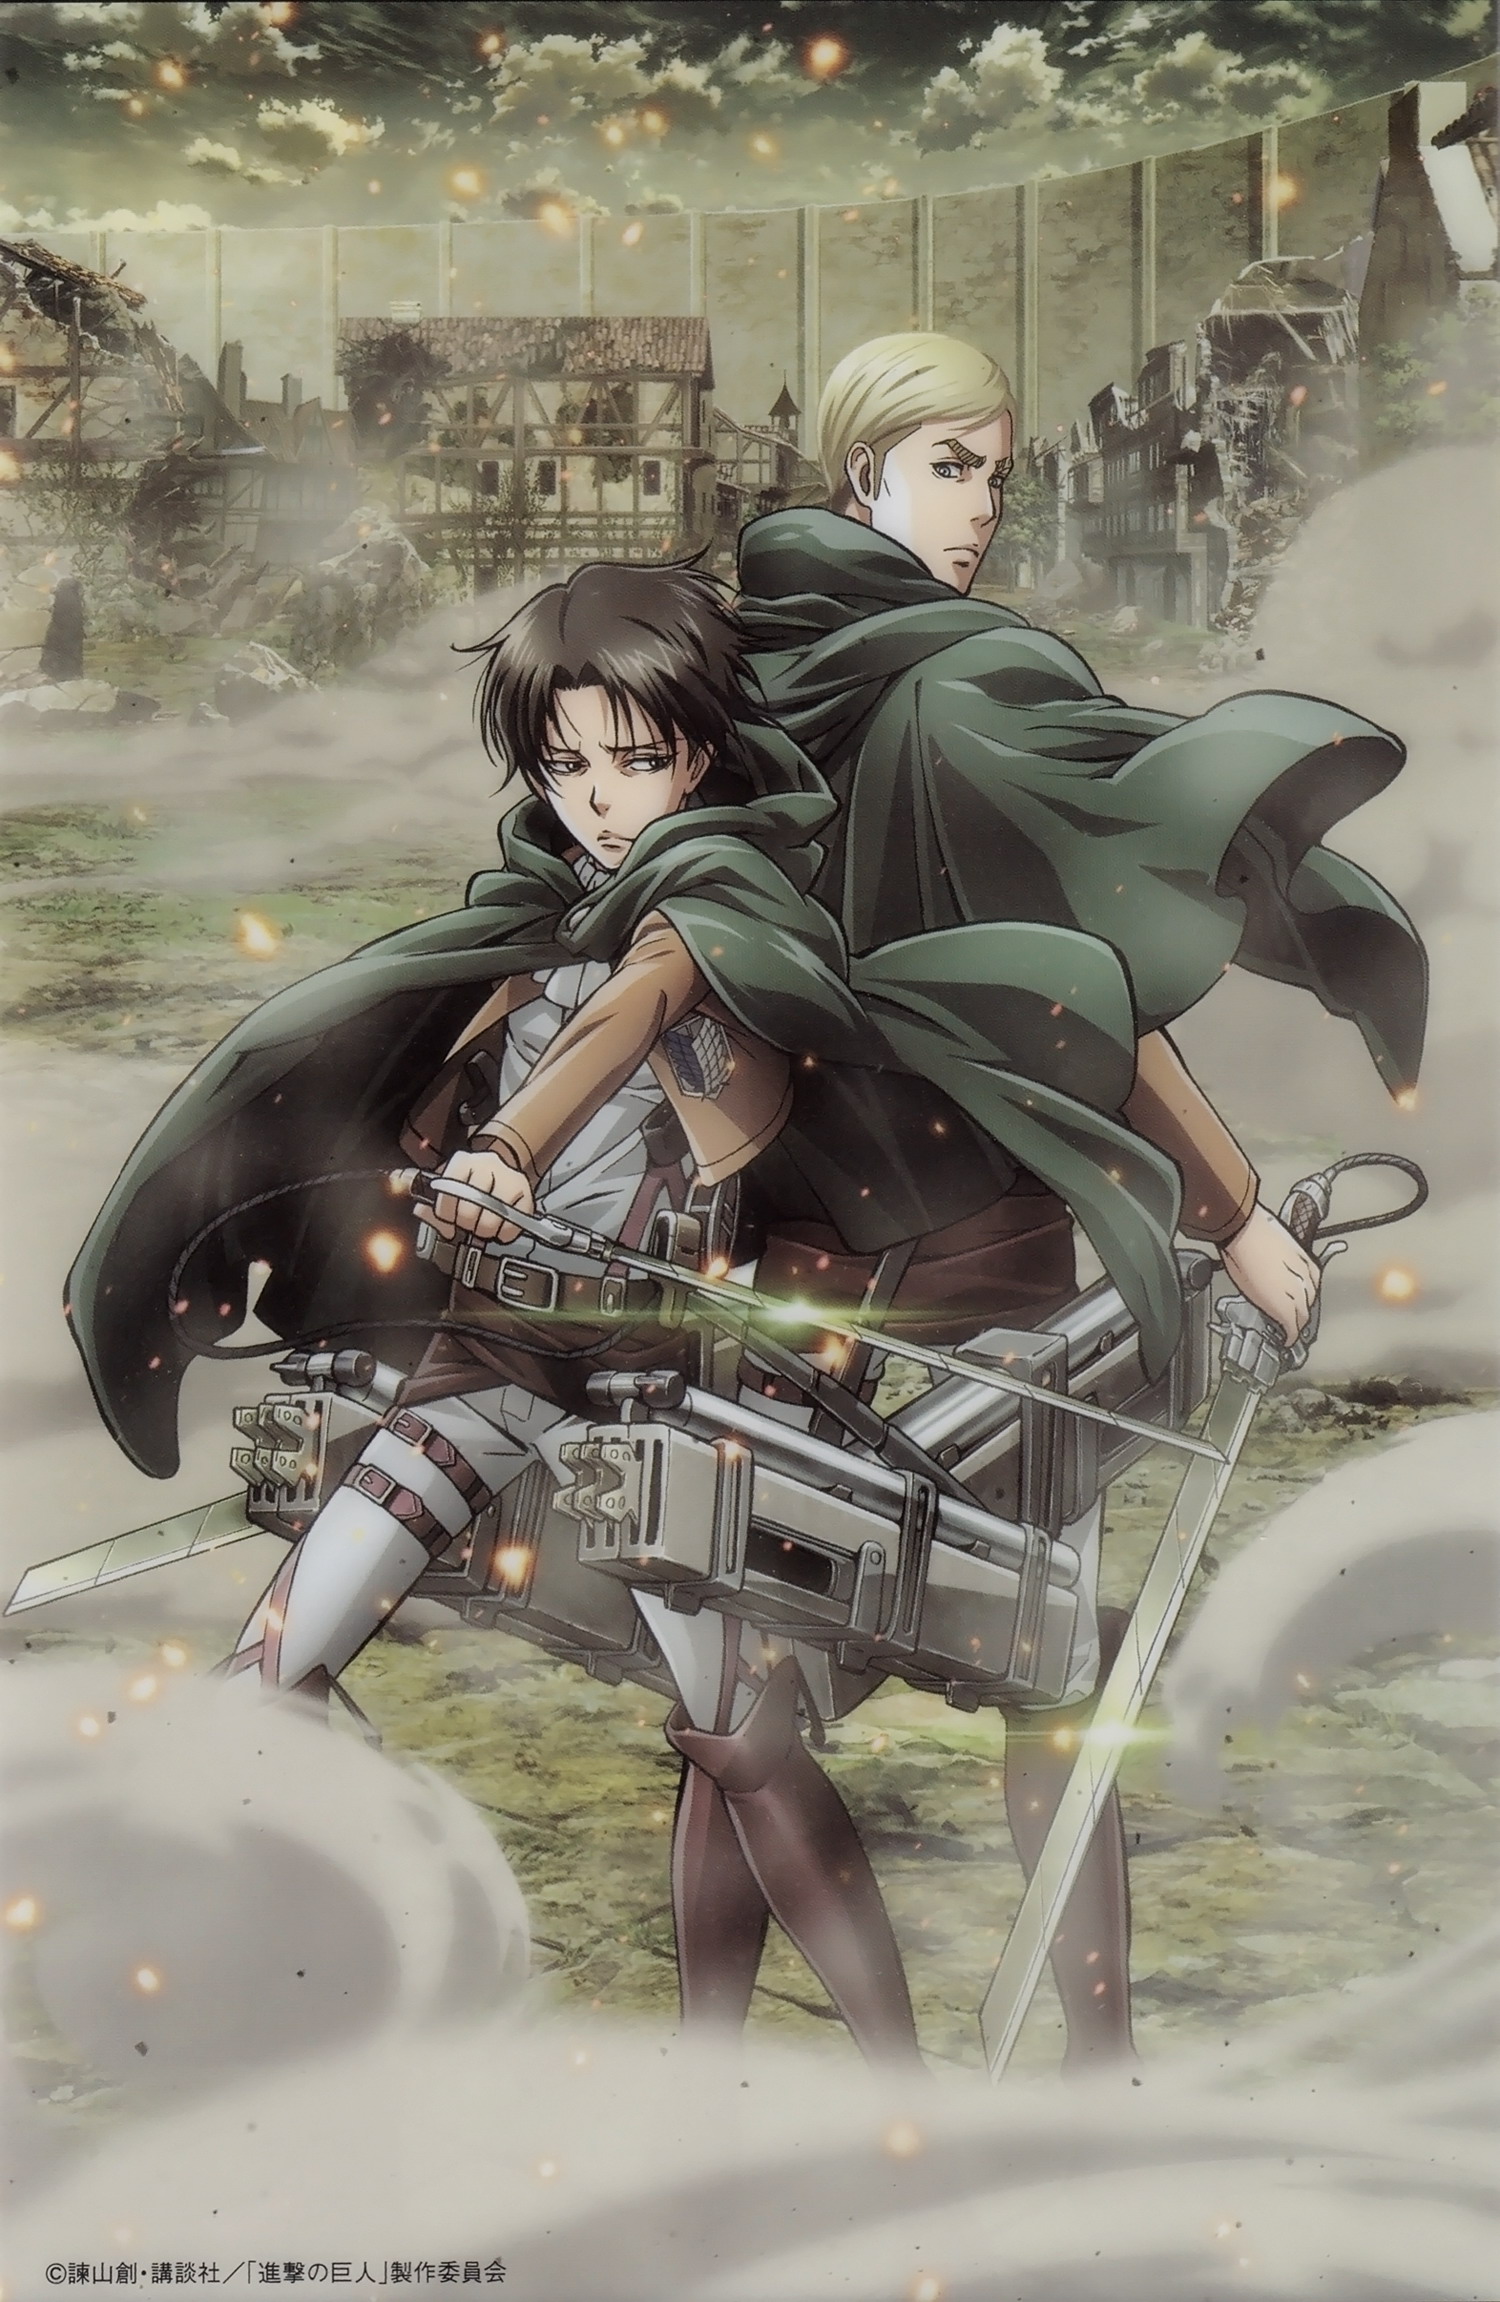 Aot Levi And Erwin - HD Wallpaper 